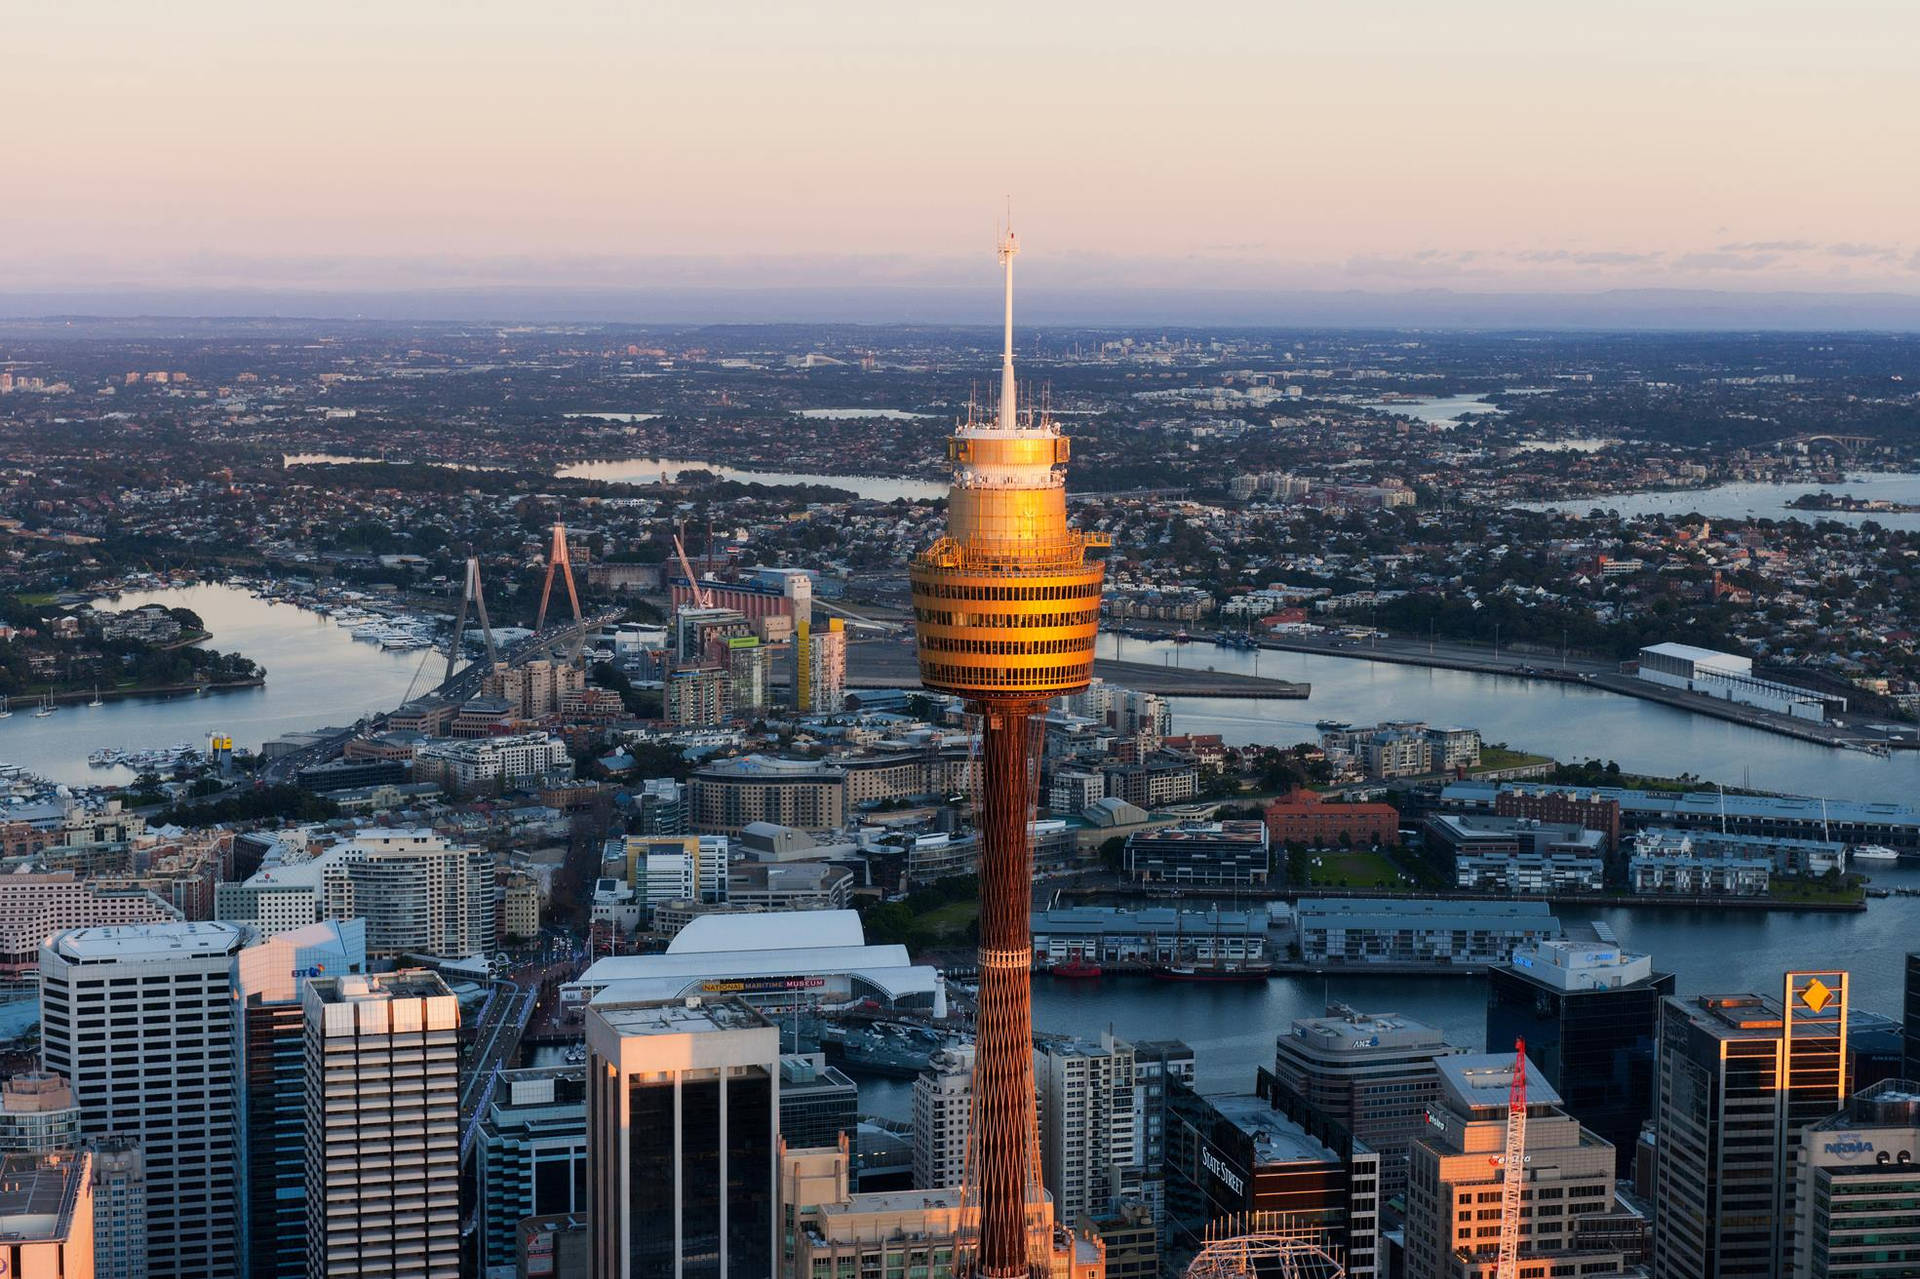 Magnificent View Of The Sydney Tower Eye Amidst The Vibrant Cityscape. Background